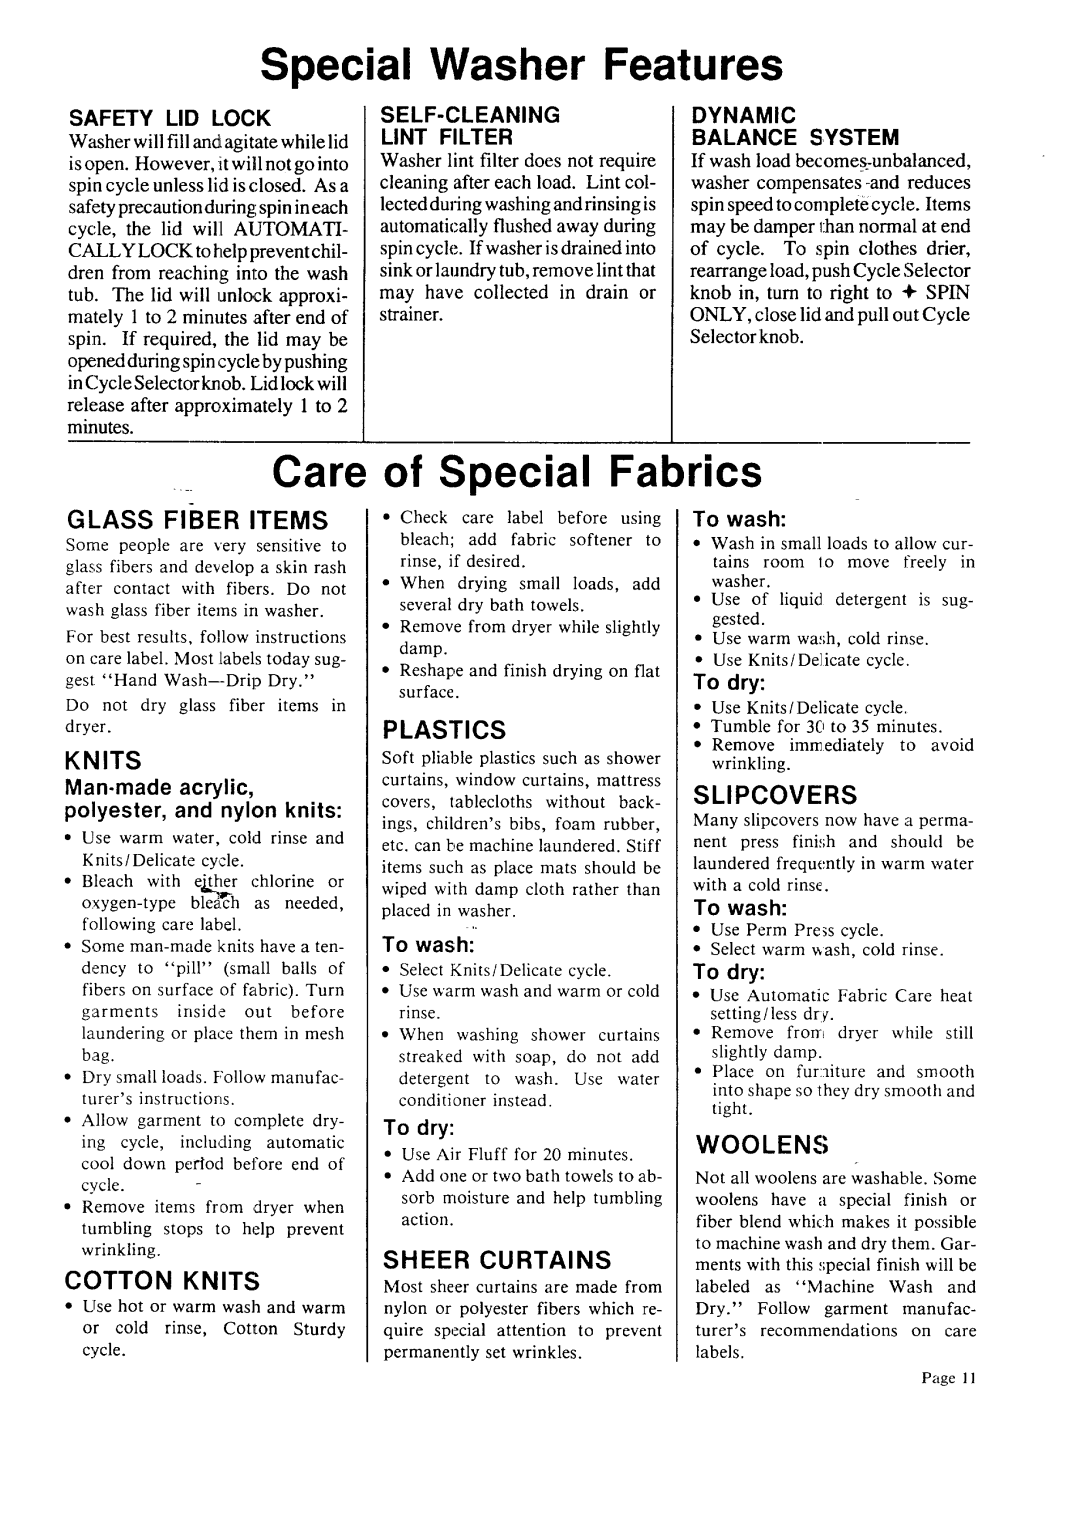 Sears 93751 Special Washer Features, Care, of Special Fabrics, Glass Fiber Items, Knits, Plastics, Slipcovers, Woolens 